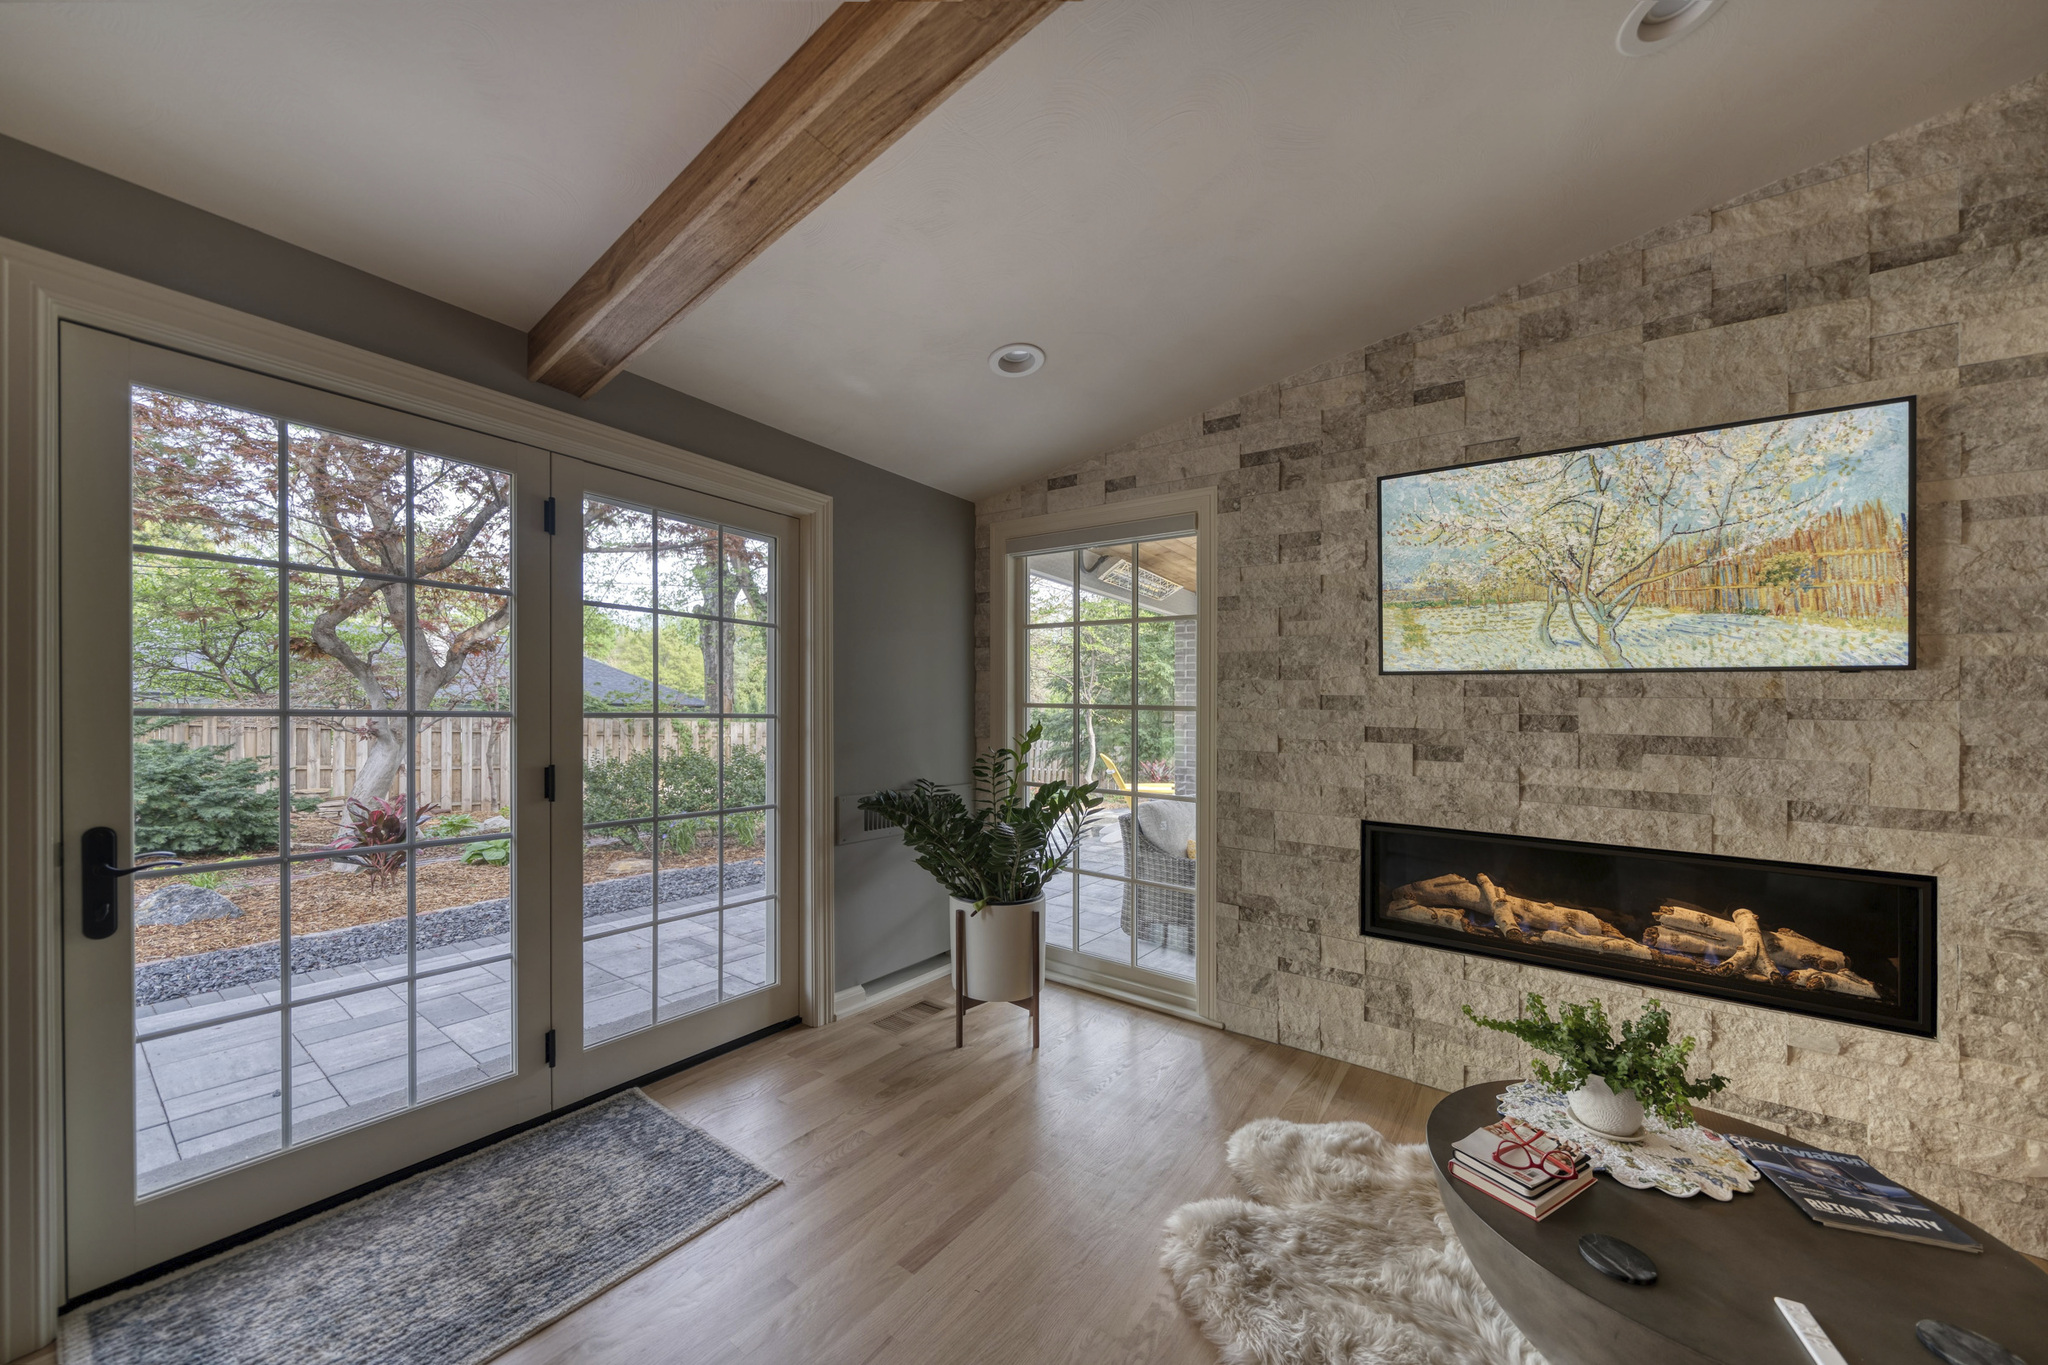 Home addition with large scenic windows, brick wall, and fireplace